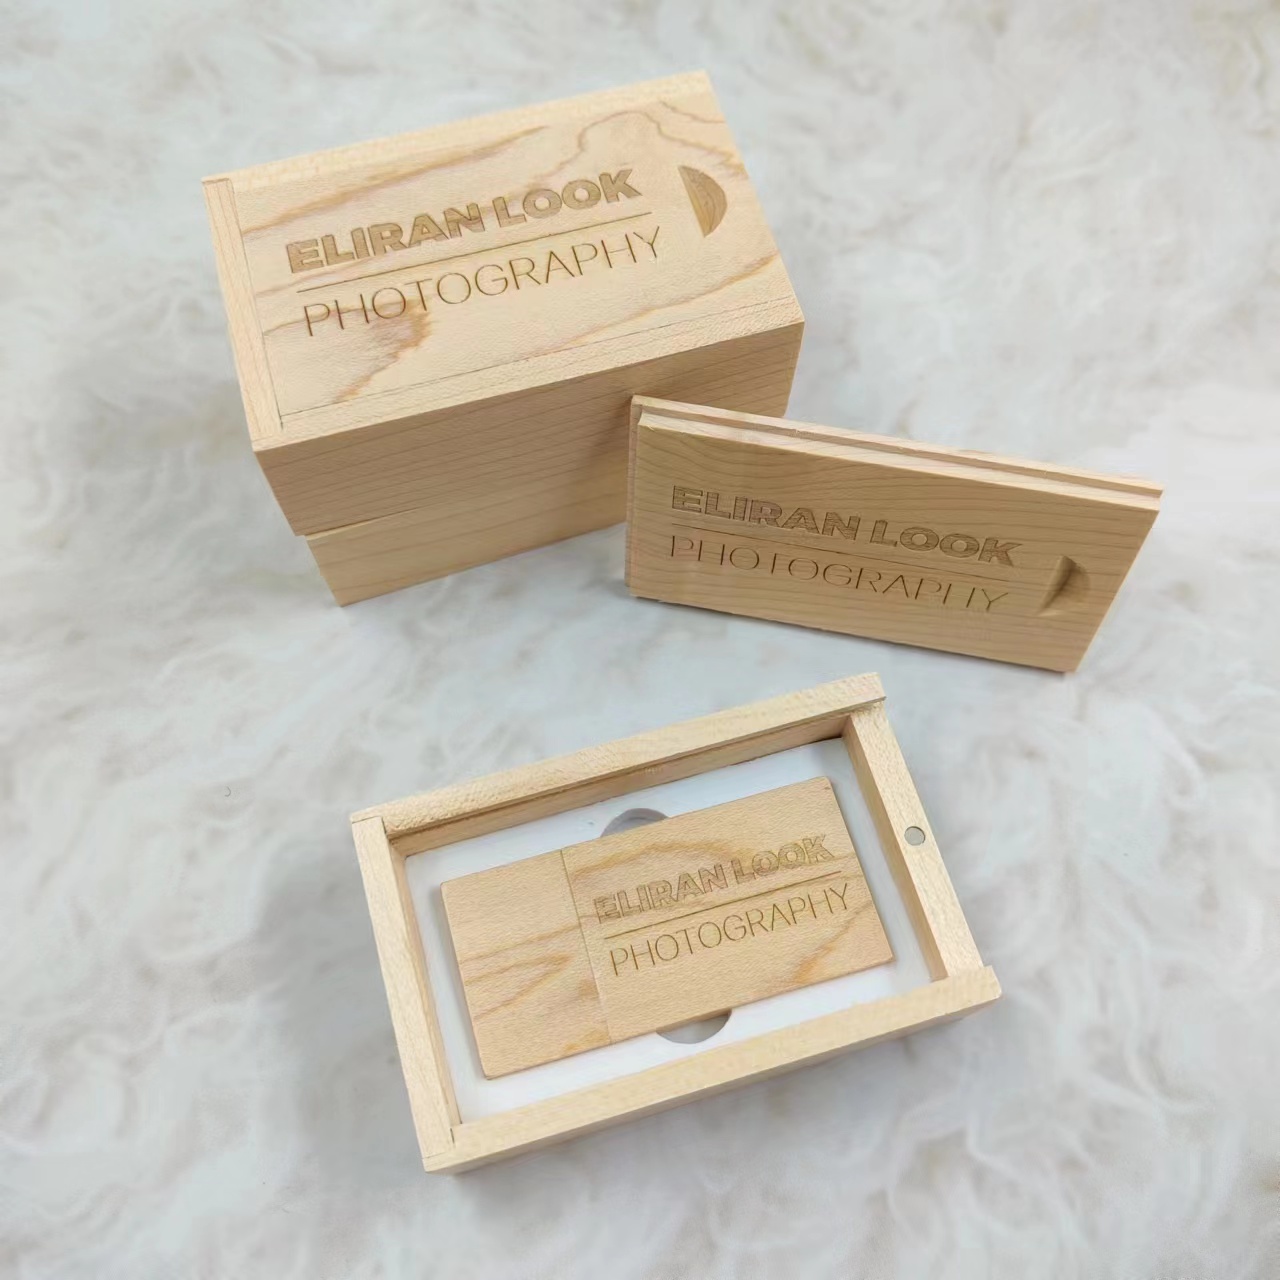 Wedding Usb and box 32GB order for ELIRAN LOOK is ready and ship 